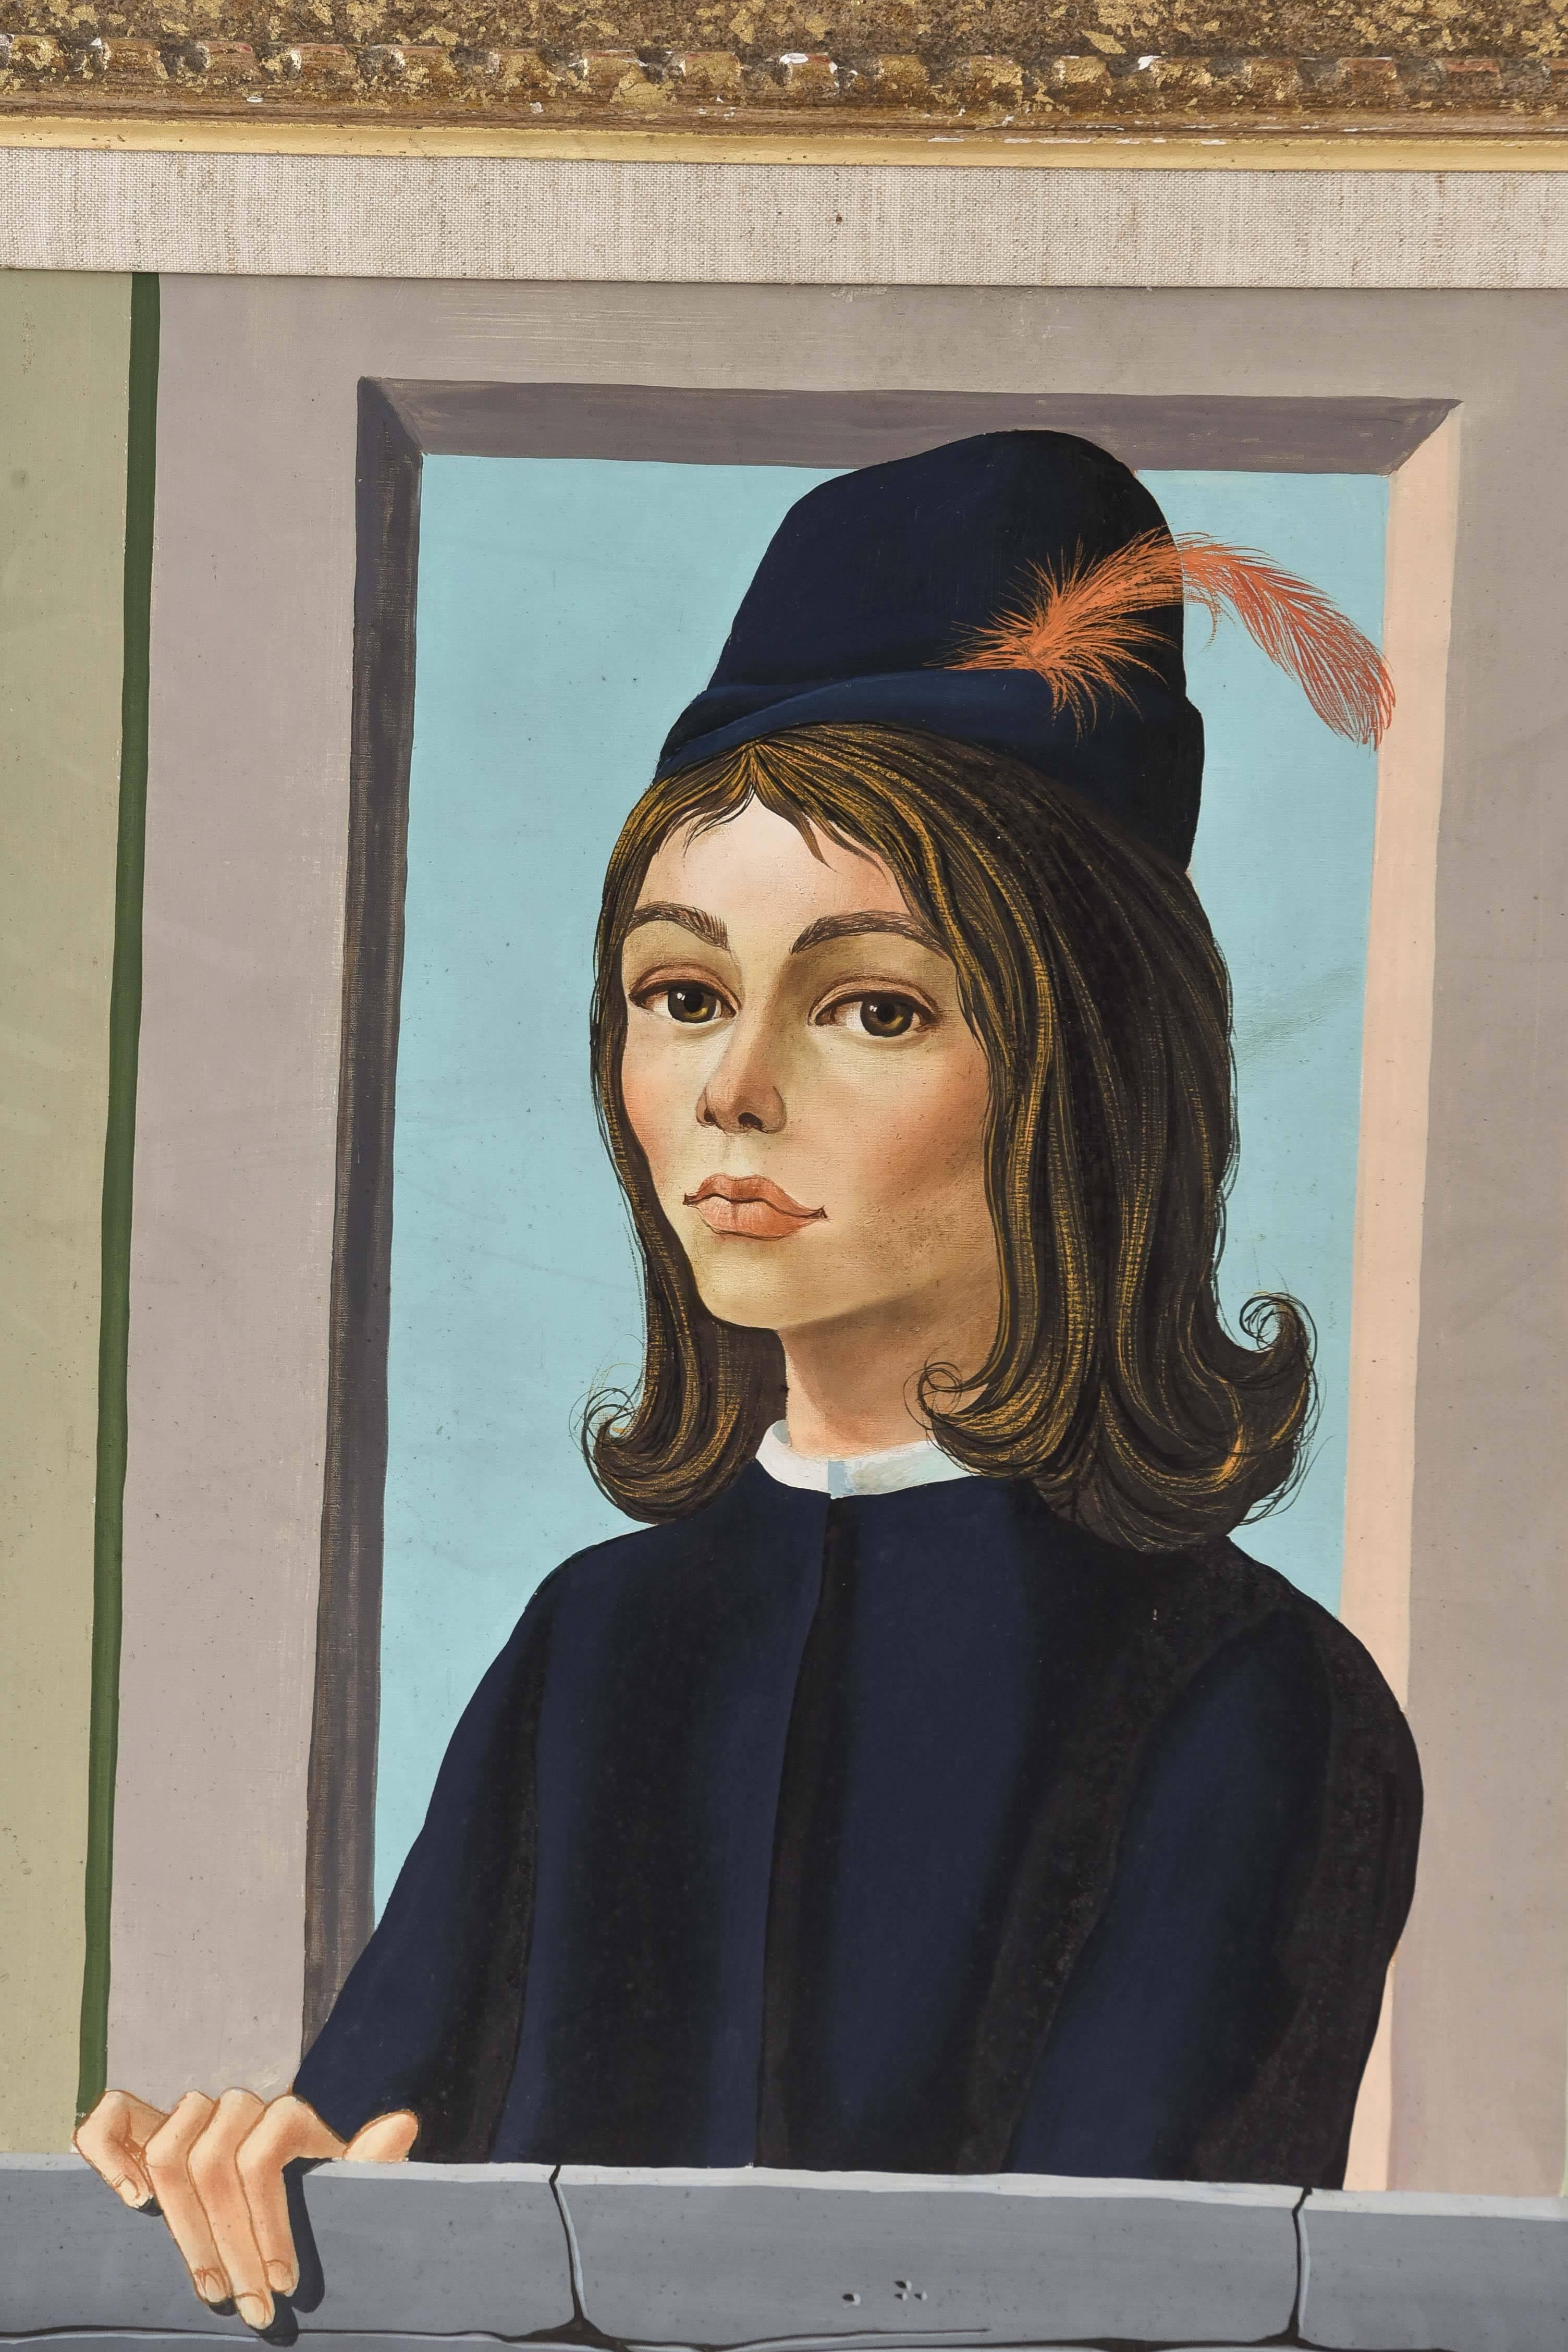 A surrealist portrait by listed French artist Jean Pierre Clement depicting a female figure framed by what appear to be walls surrounding a window. She wears a dark button down coat and a matching hat with a red feather, while her hand grips the